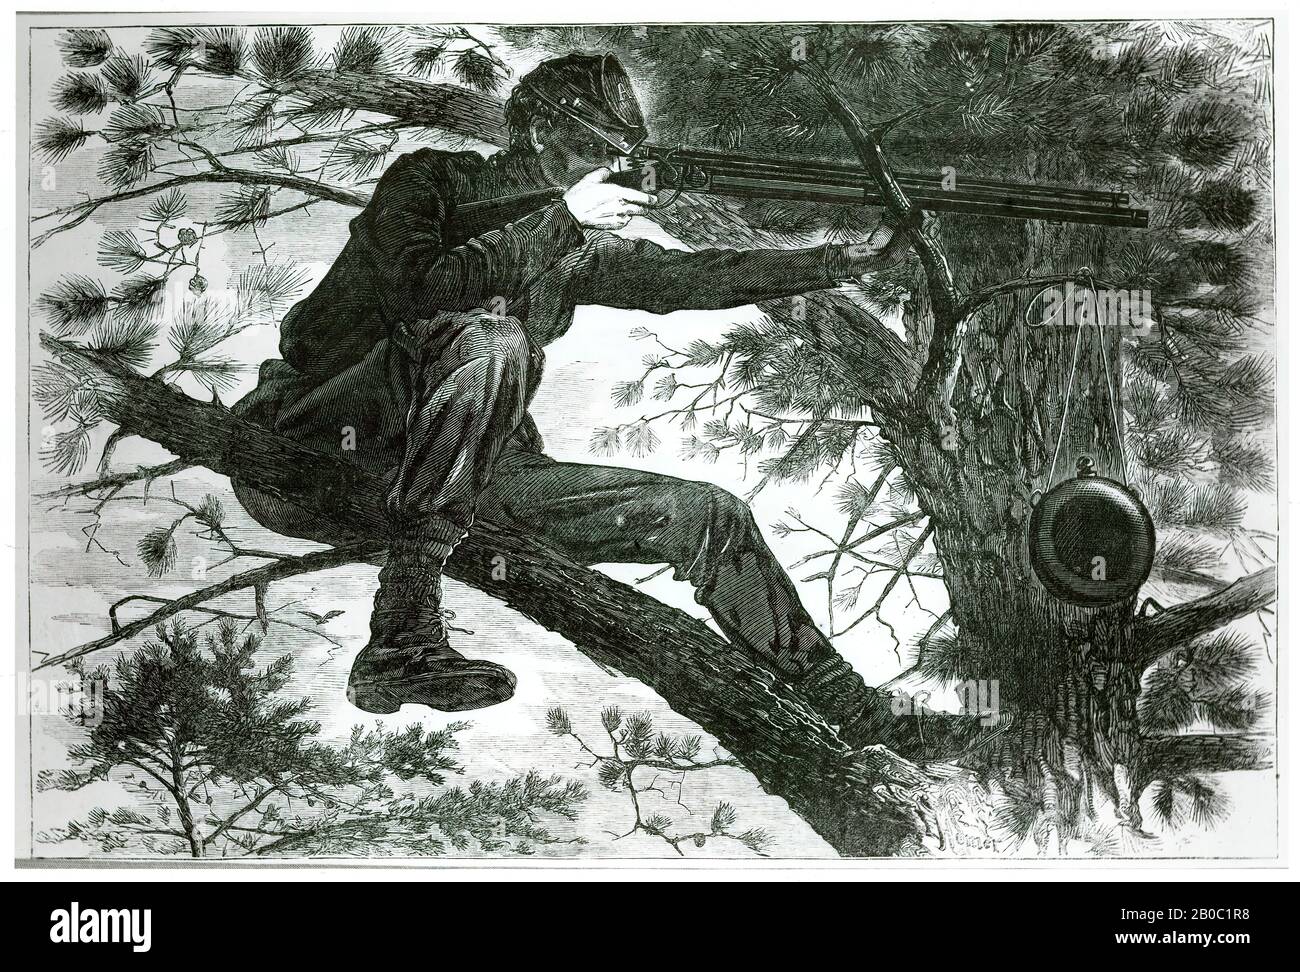 Winslow Homer, The Army of the Potomac--Sharpshooter on Picket Duty, 1862, wood engraving on paper, 11 3/16 in. x 16 in. (28.42 cm x 40.64 cm Stock Photo